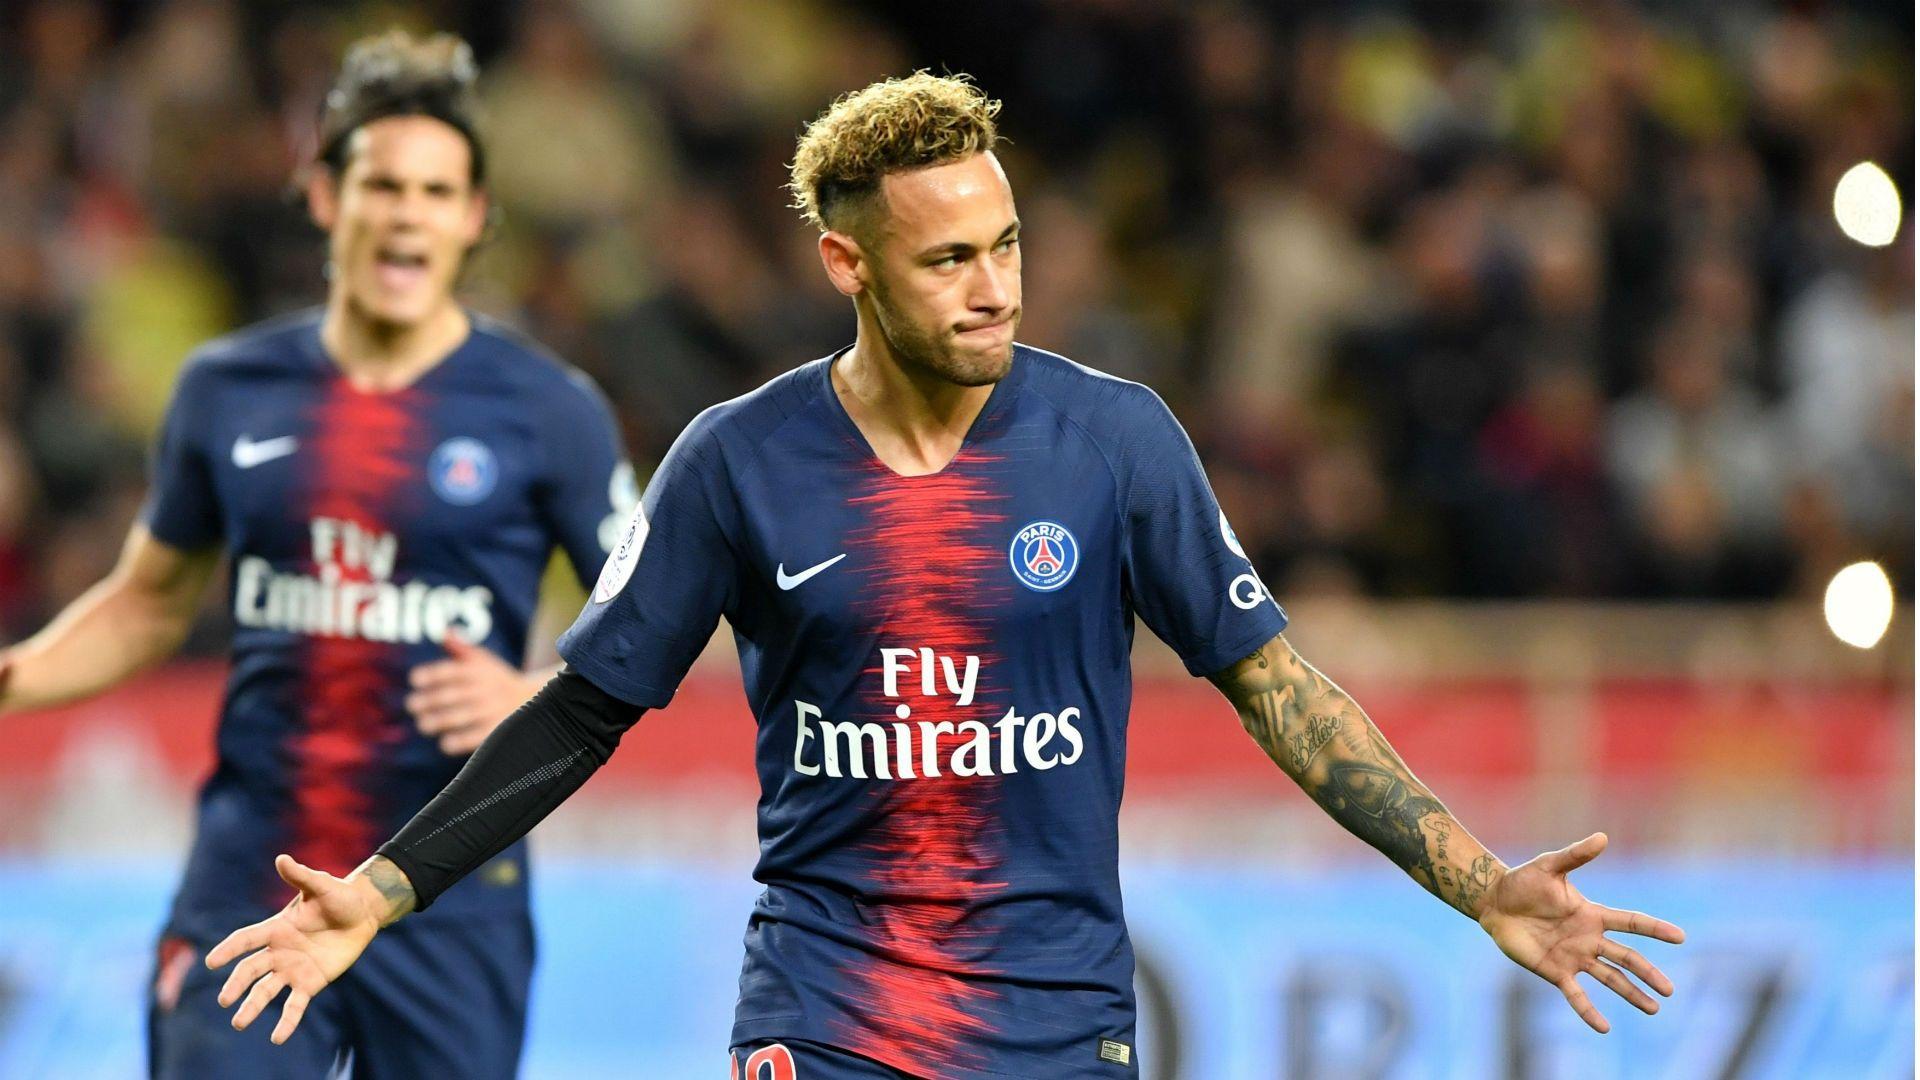 Reports: Neymar to leave PSG in 2019 with three clubs looming